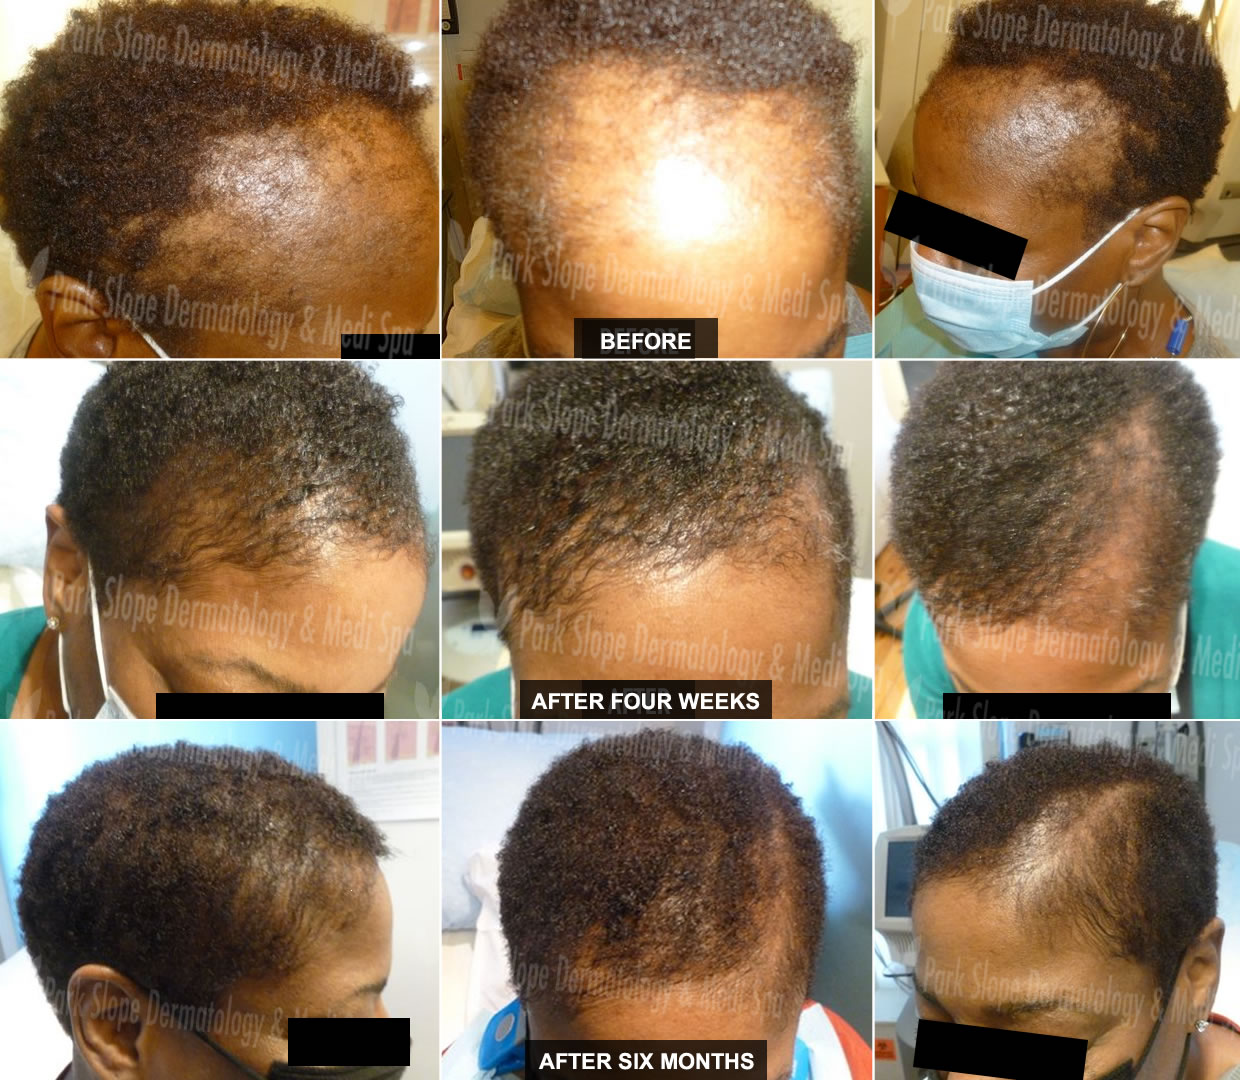 ALOPECIA / HAIR LOSS – BEFORE / AFTER 4 WEEKS POST 2ND TREATMENT / 6 MONTHS AFTER 1ST TREATMENT